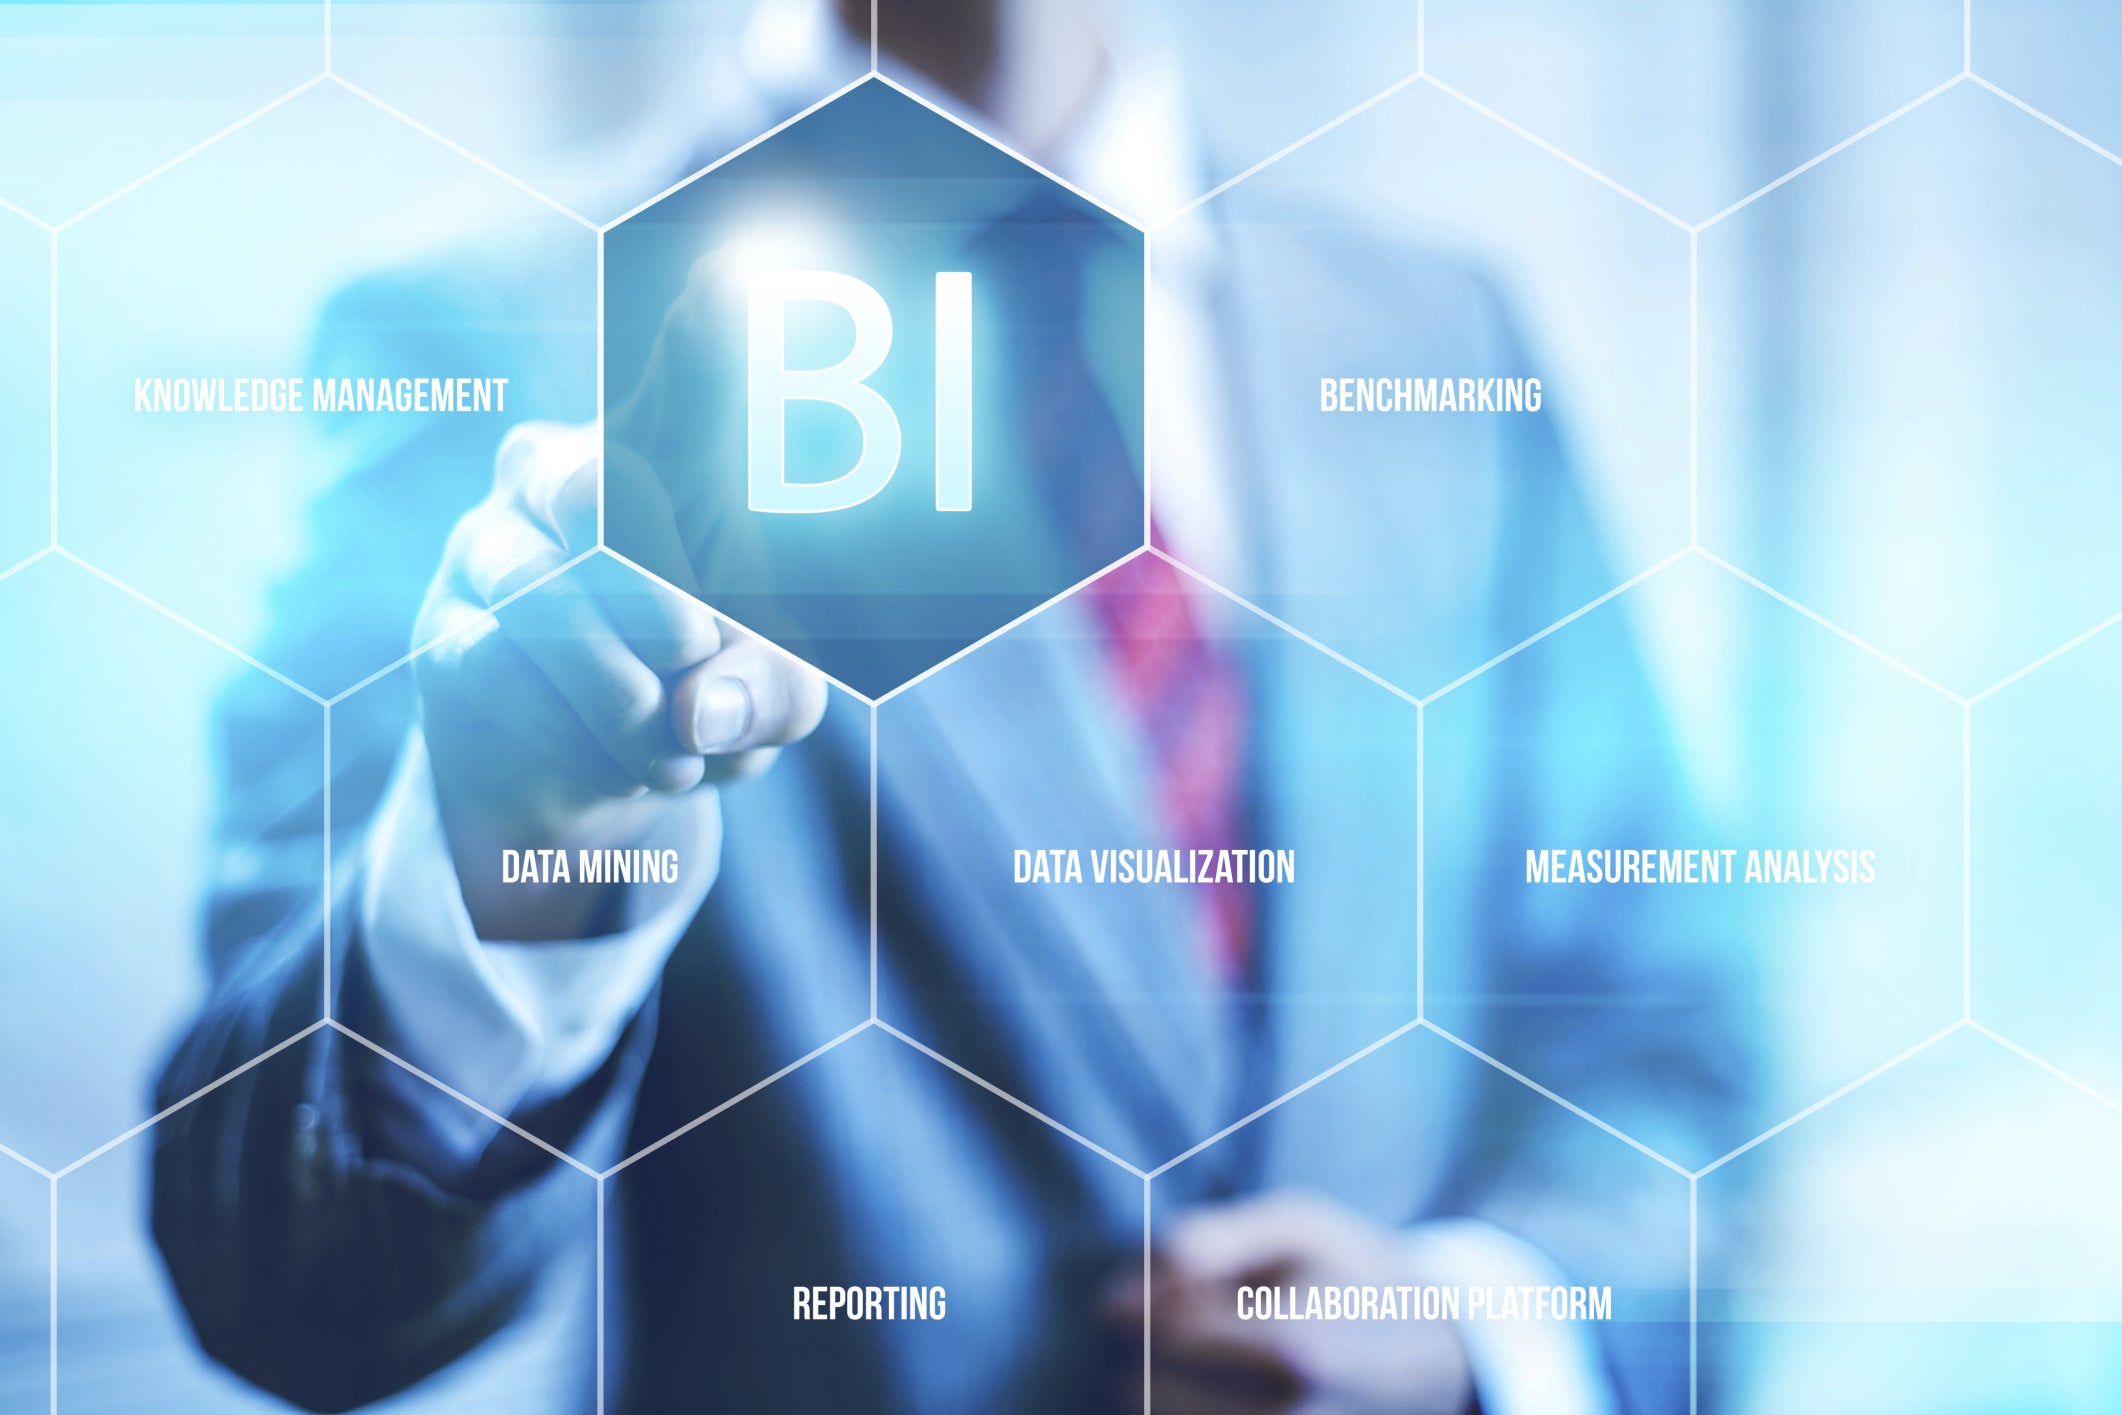 What key challenges faced when implementing BI in Saudi Arabia?